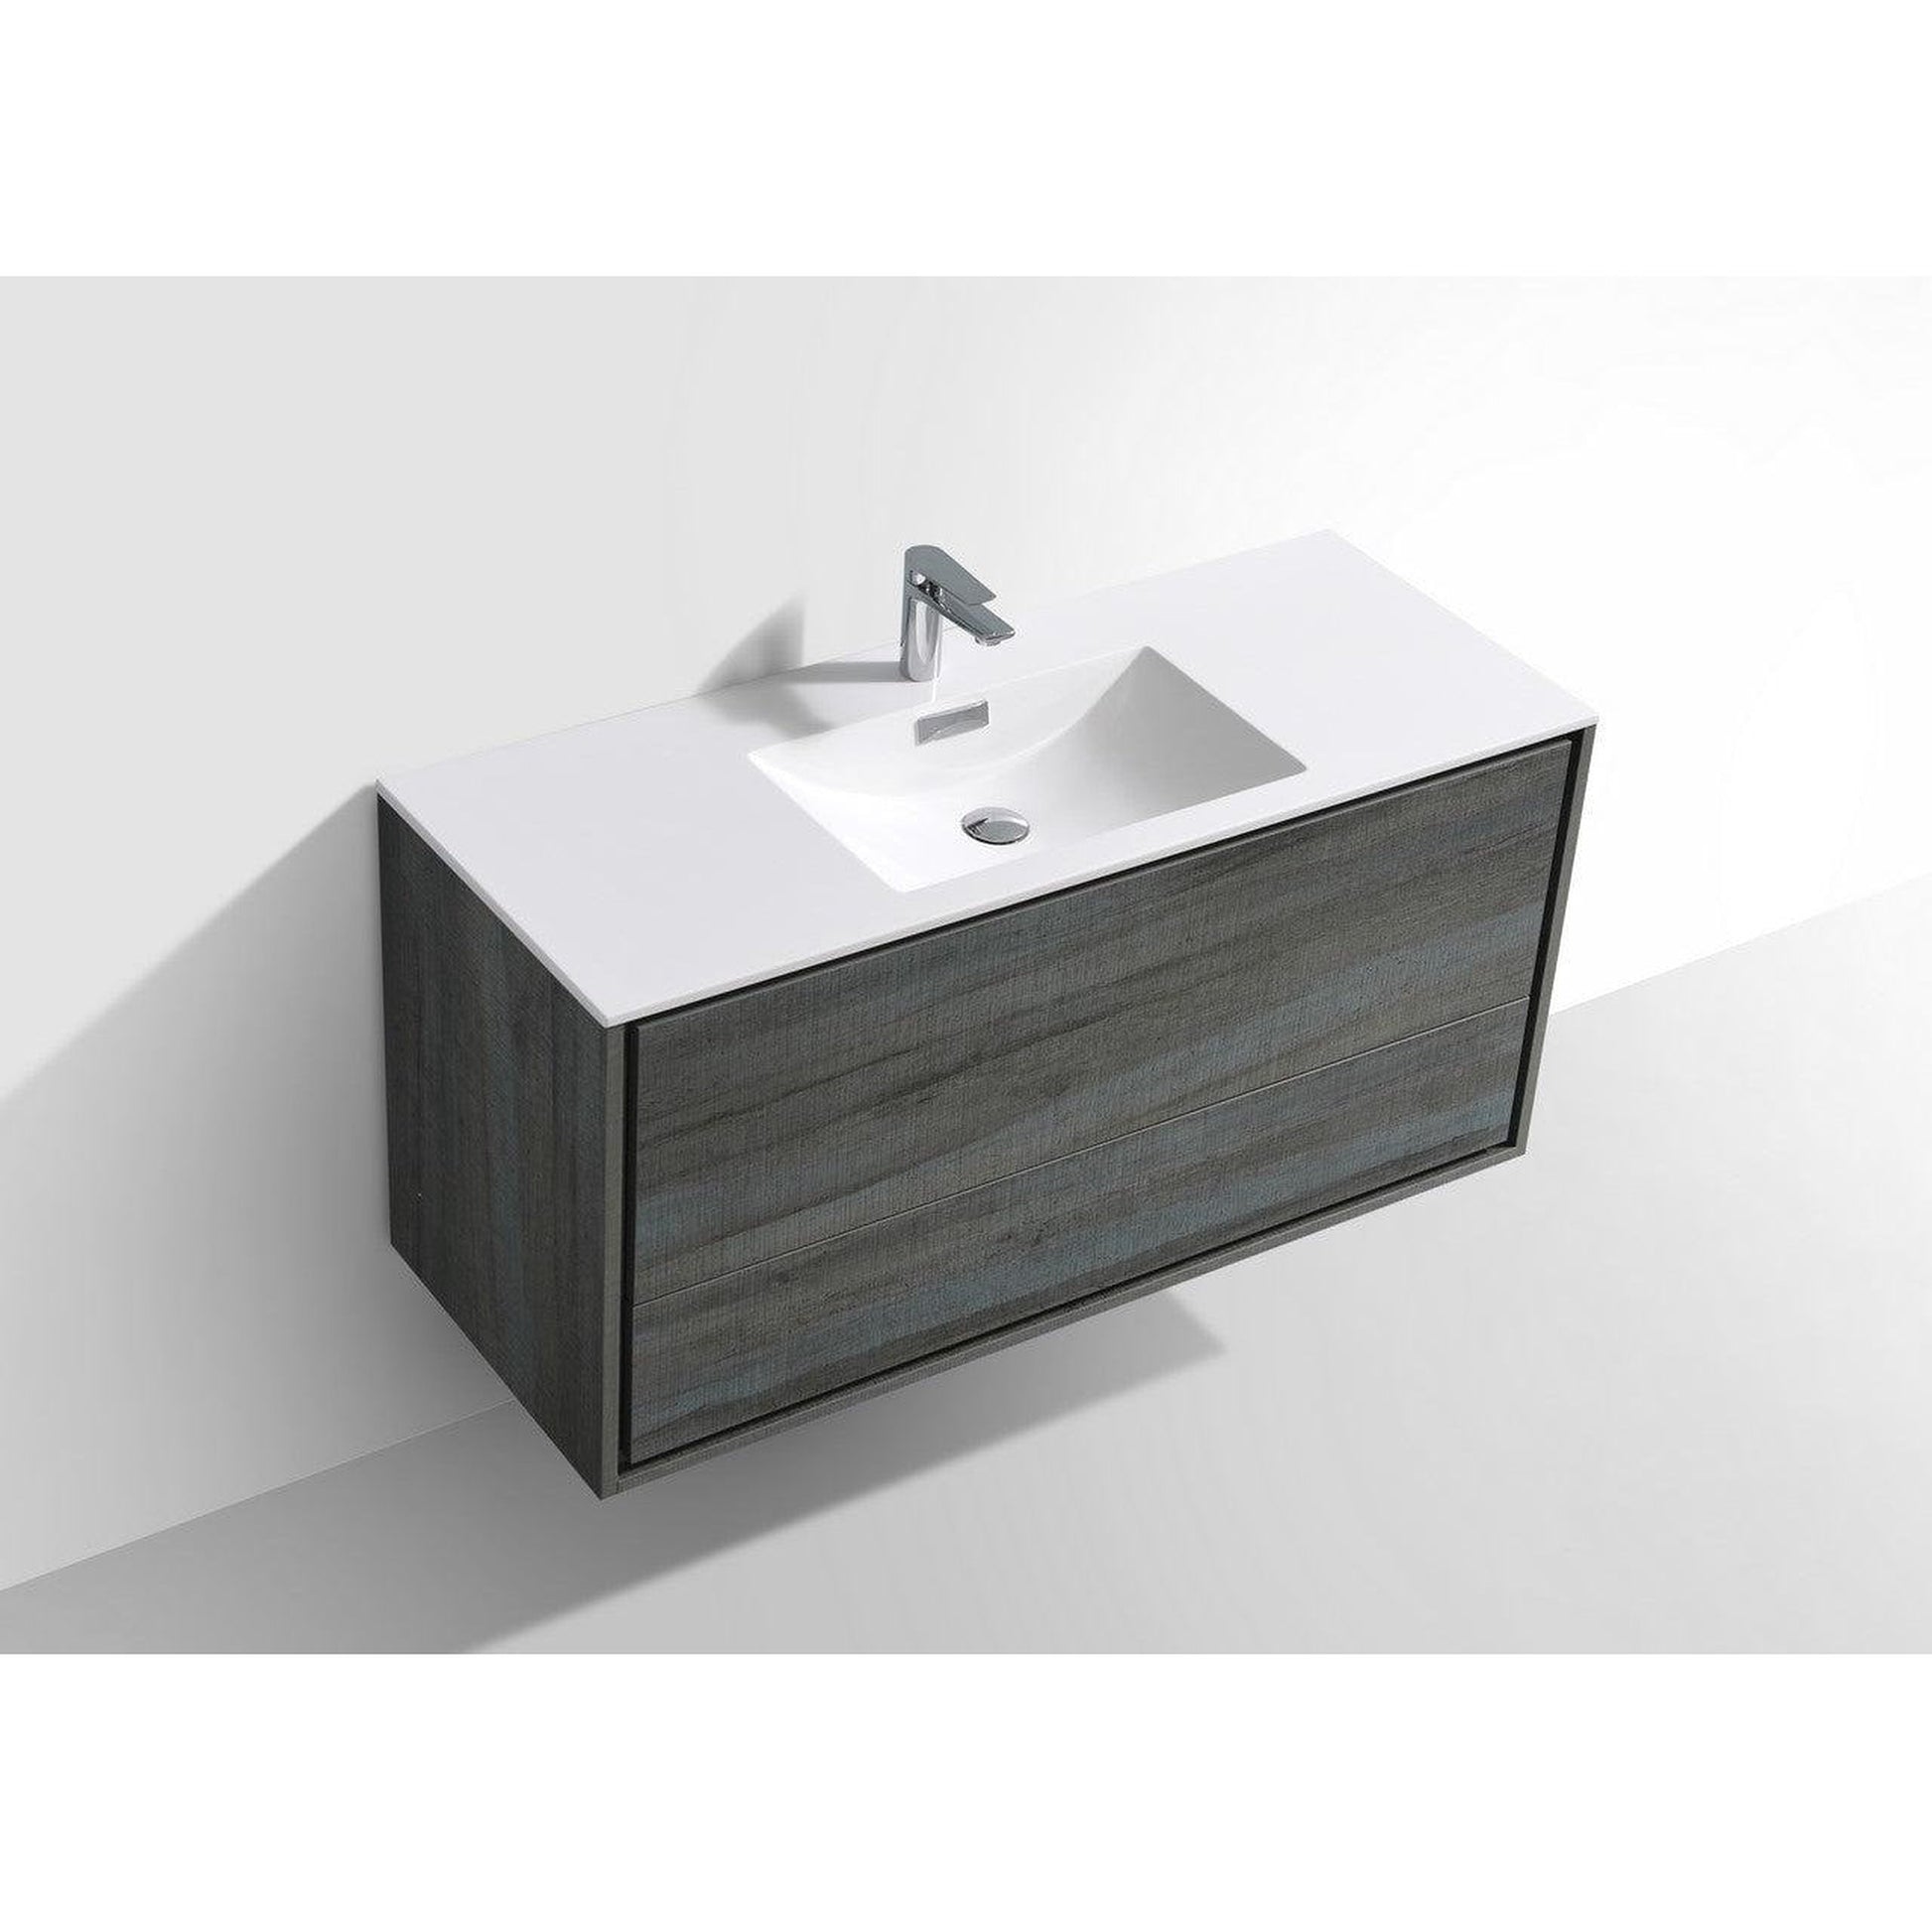 KubeBath DeLusso 48" Ocean Gray Wall-Mounted Modern Bathroom Vanity With Single Integrated Acrylic Sink With Overflow and 48" White Framed Mirror With Shelf